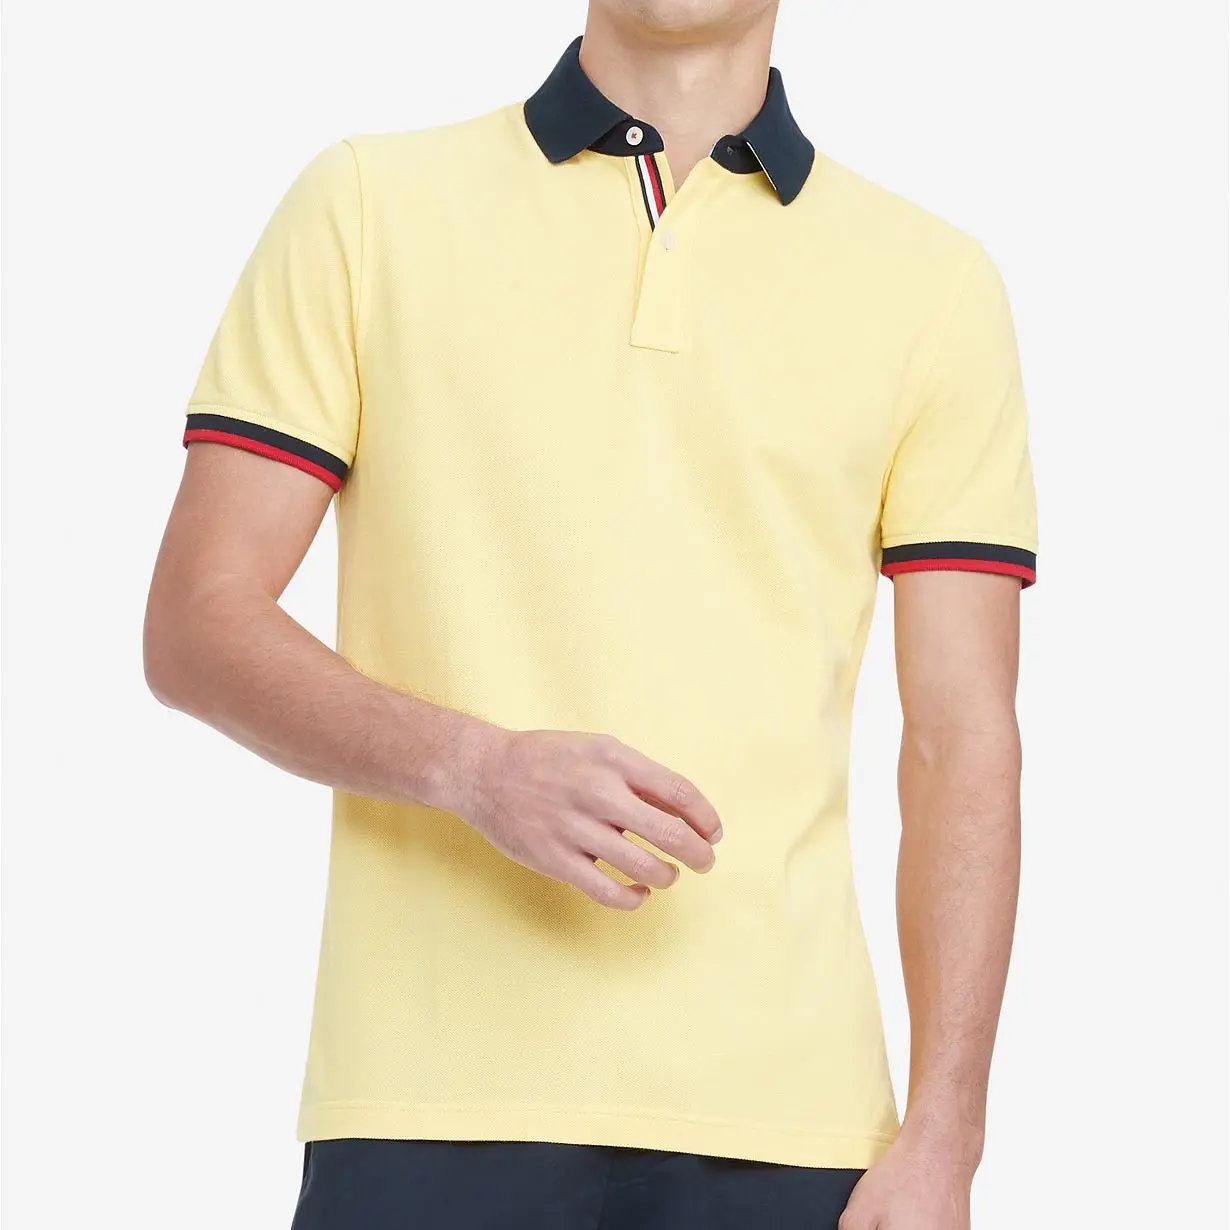 Custom The Best Men's Polo Shirts Contrast Trim At The Placket And Cuff Slim Fit Hot-selling Polo Shirt